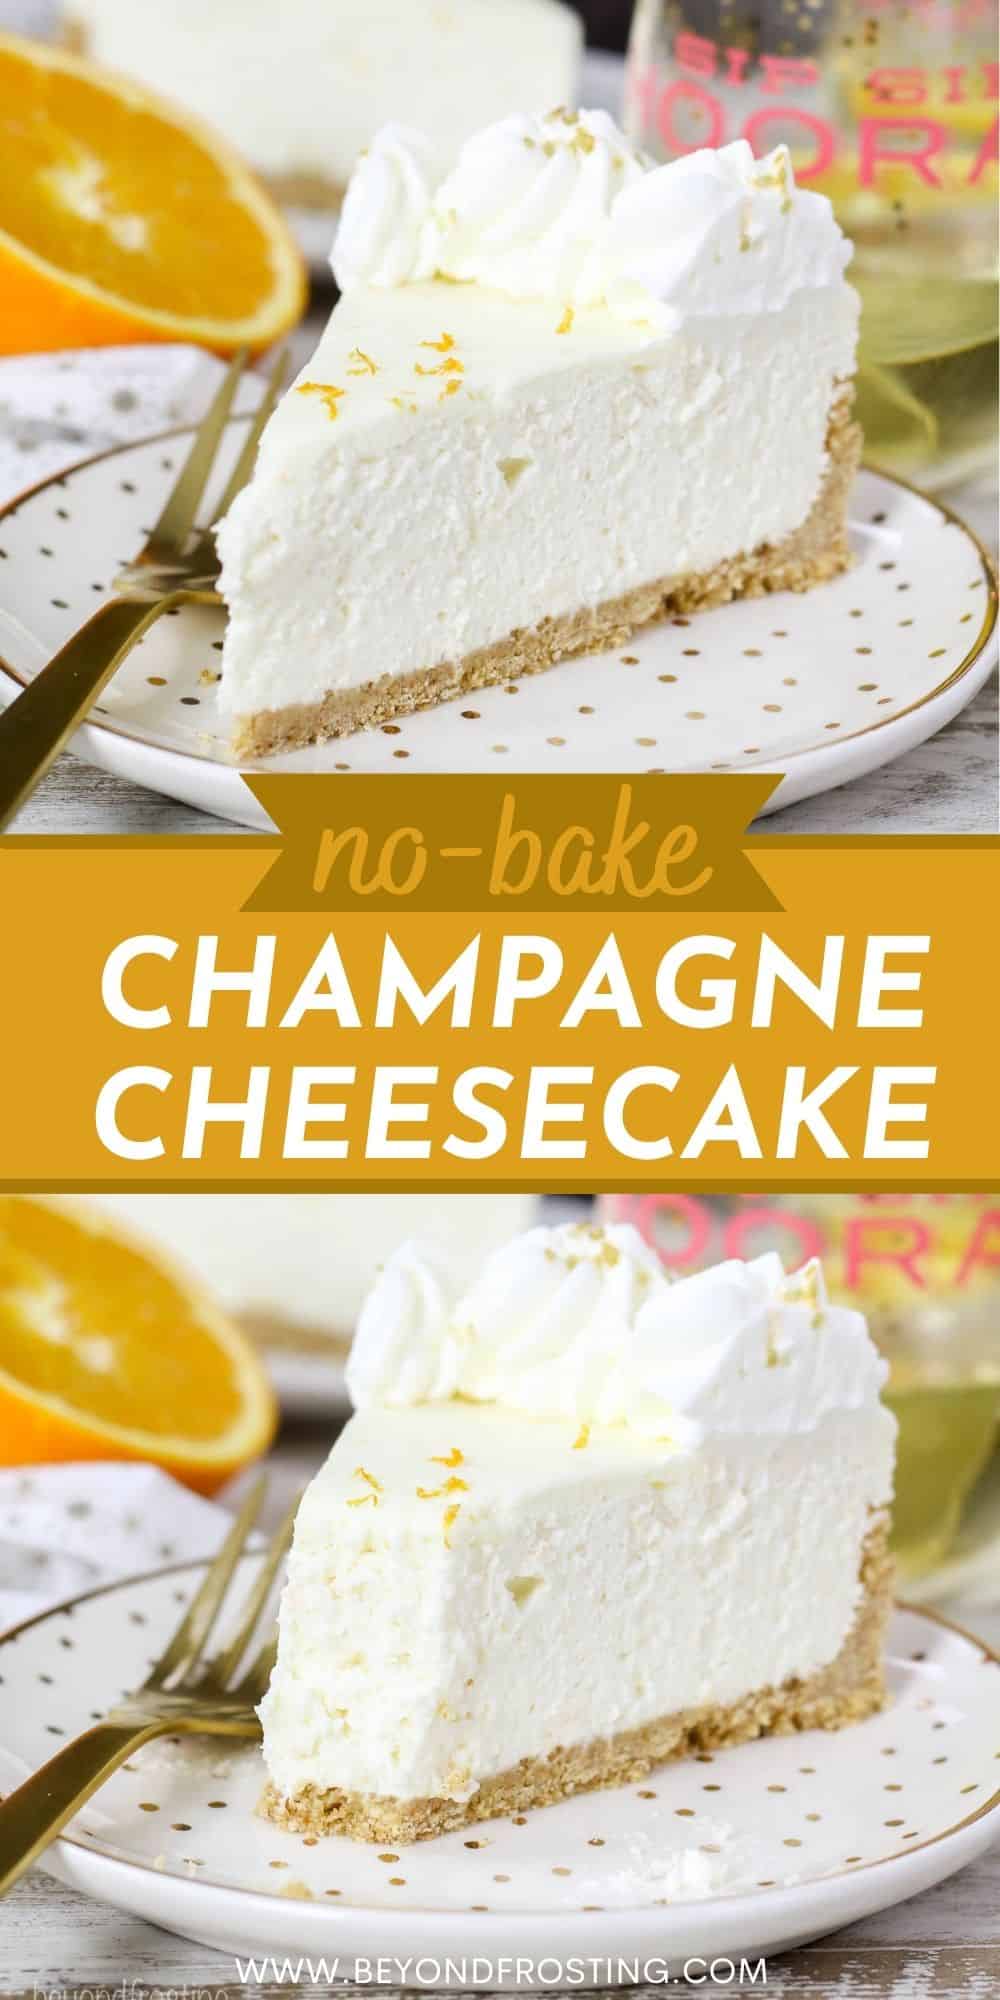 No-Bake Champagne Cheesecake | Beyond Frosting